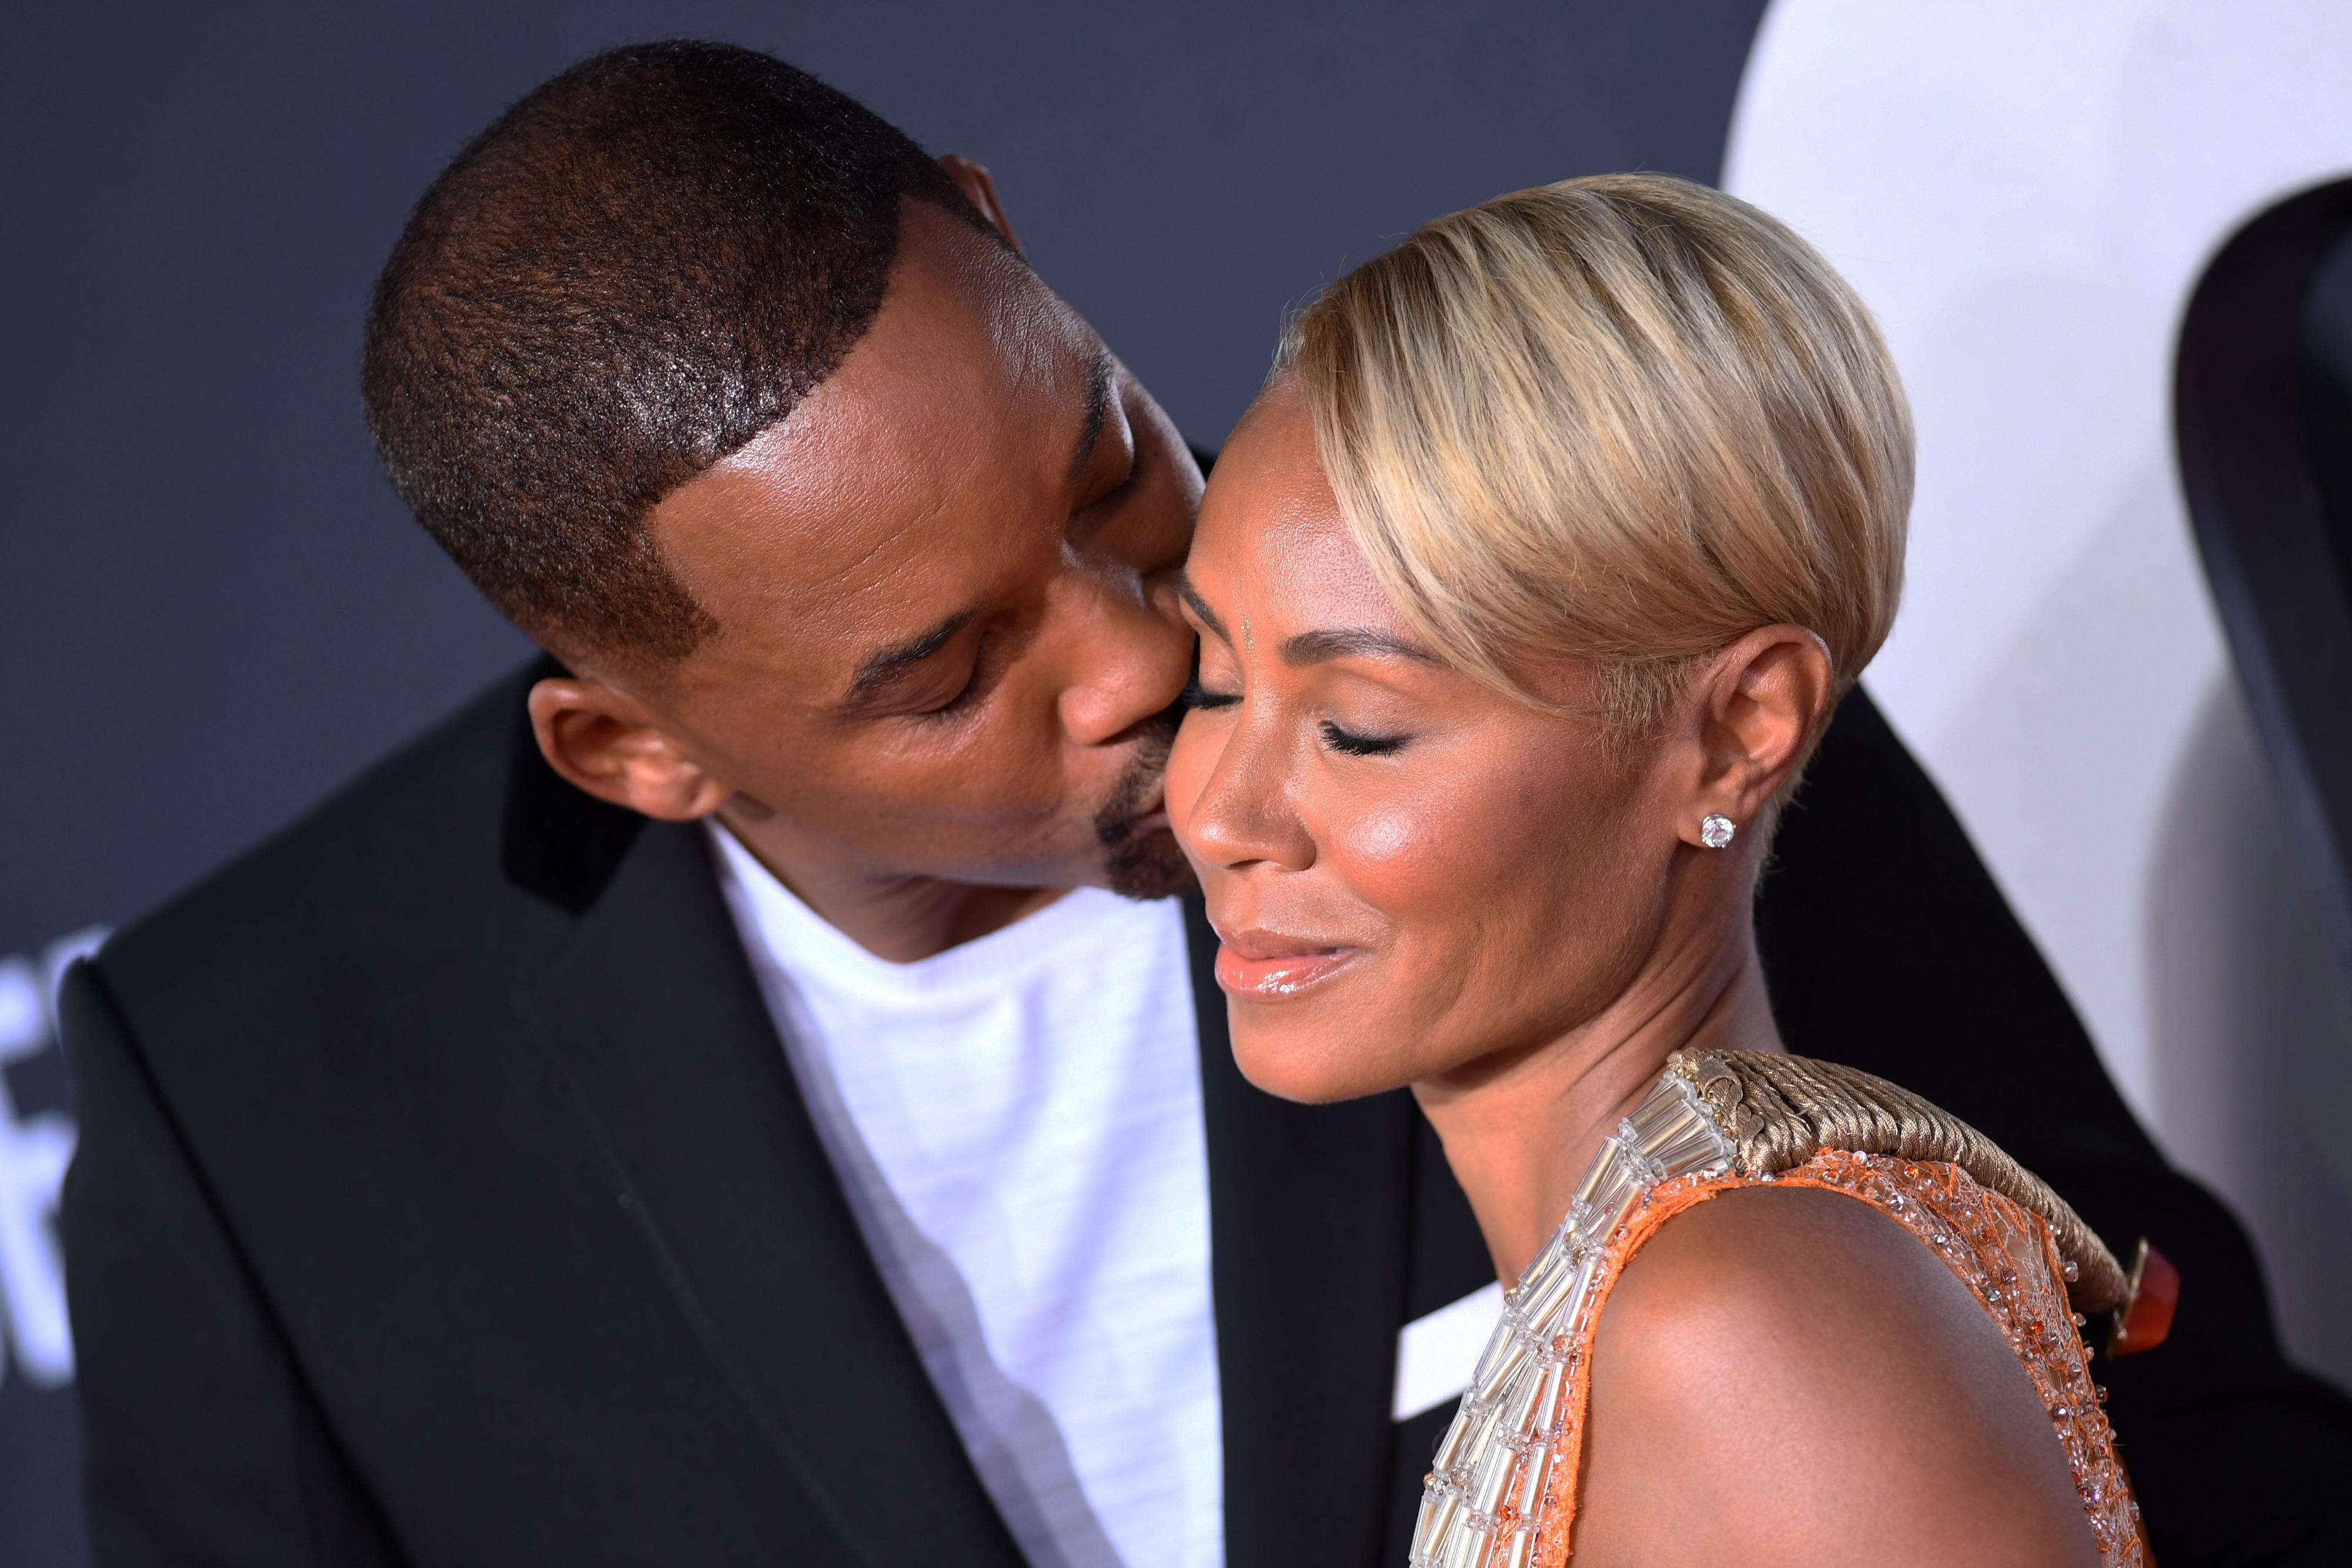 Close-up of Will kissing Jada on the cheek